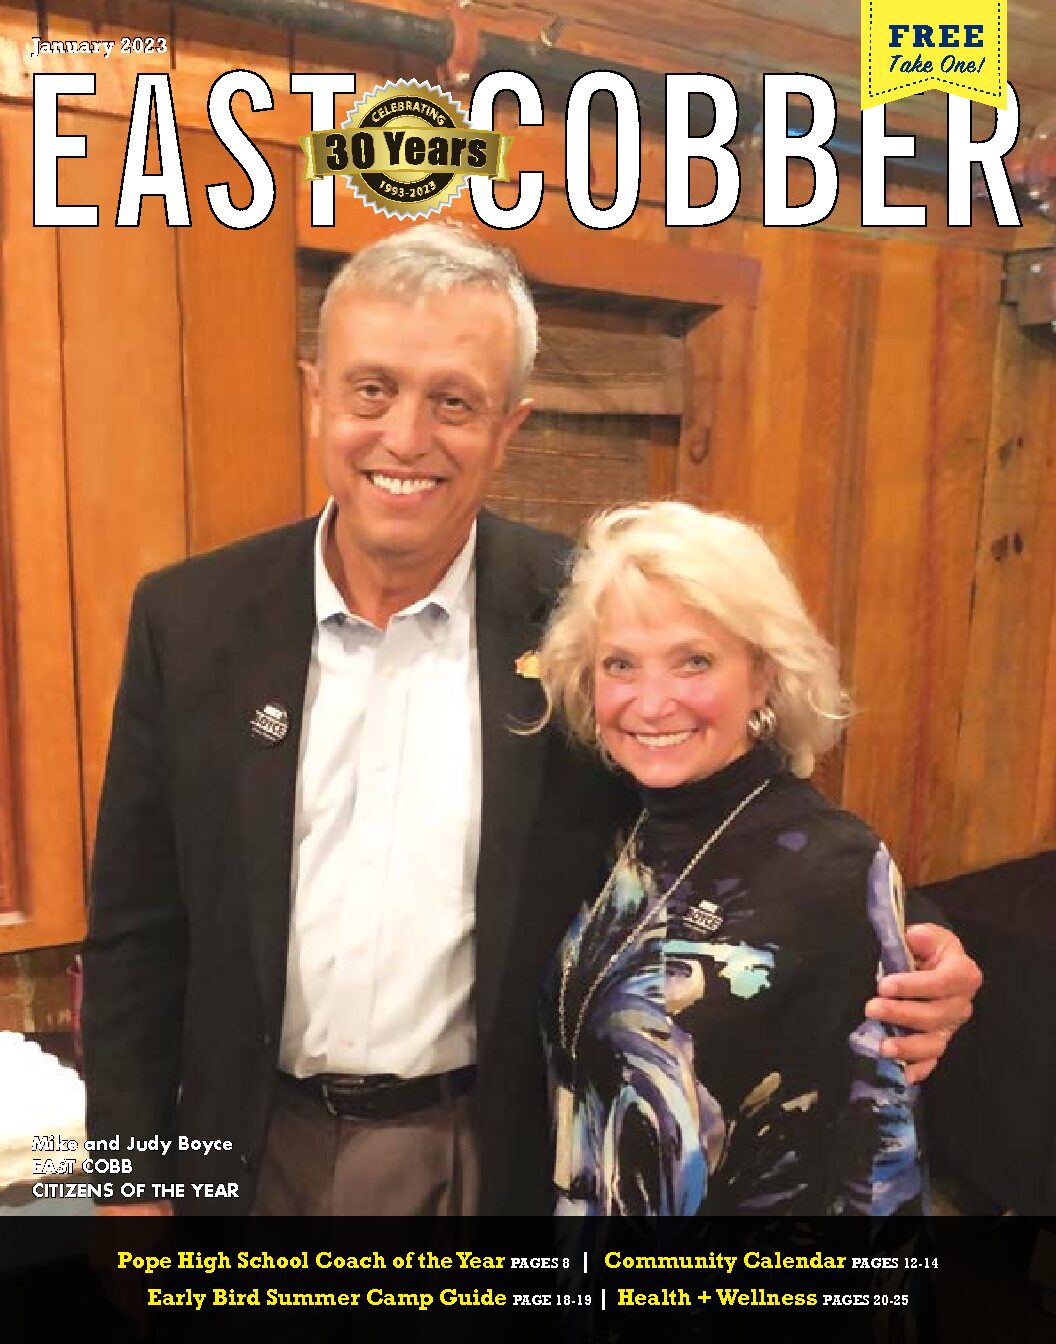 COBB CHAMBER ANNOUNCES 2022 EAST COBB CITIZENS OF THE YEAR